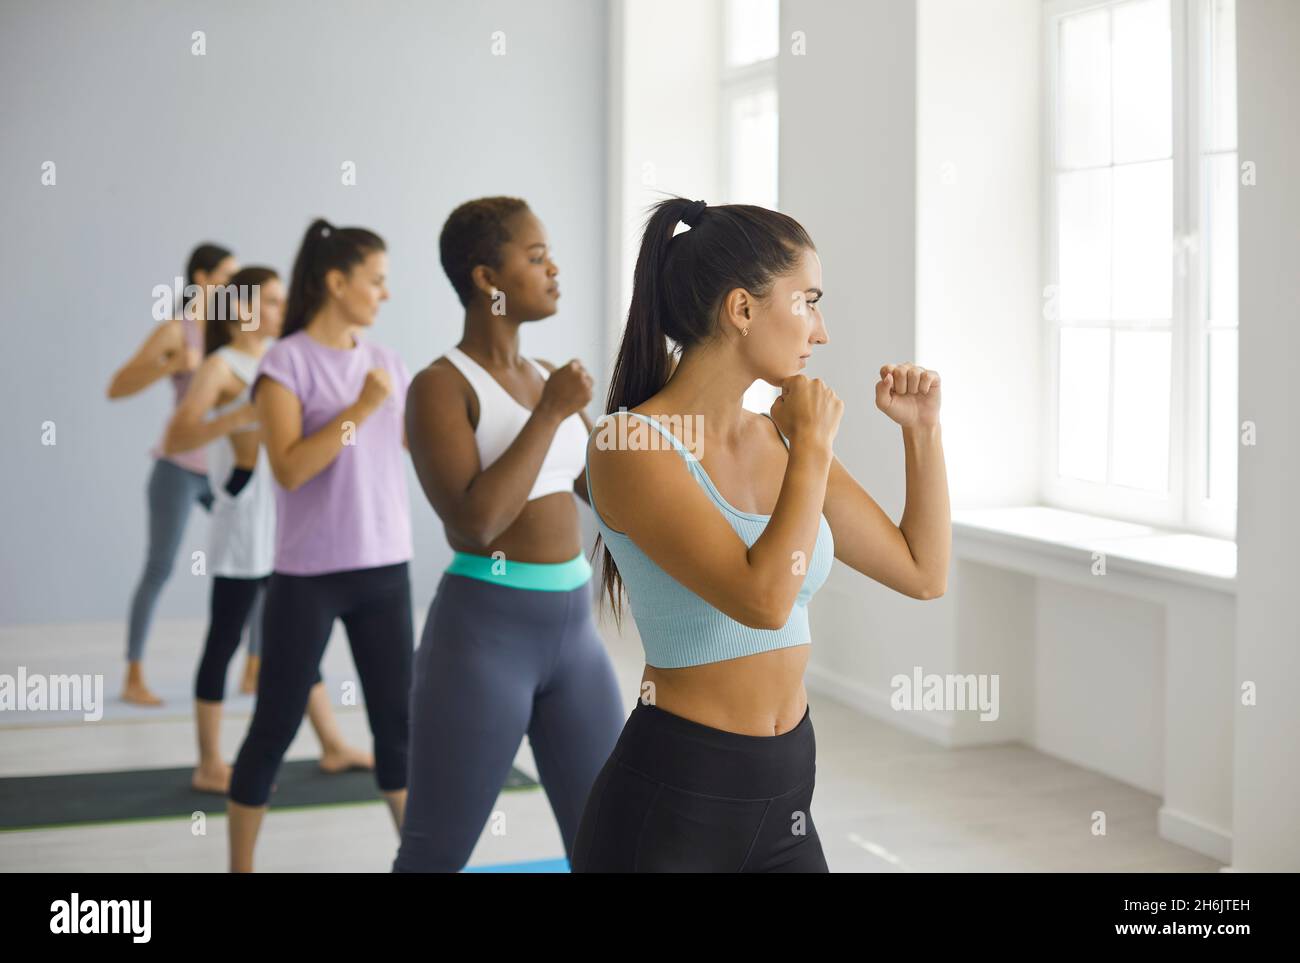 Diverse group of confident women doing physical exercise during sports workout at gym Stock Photo